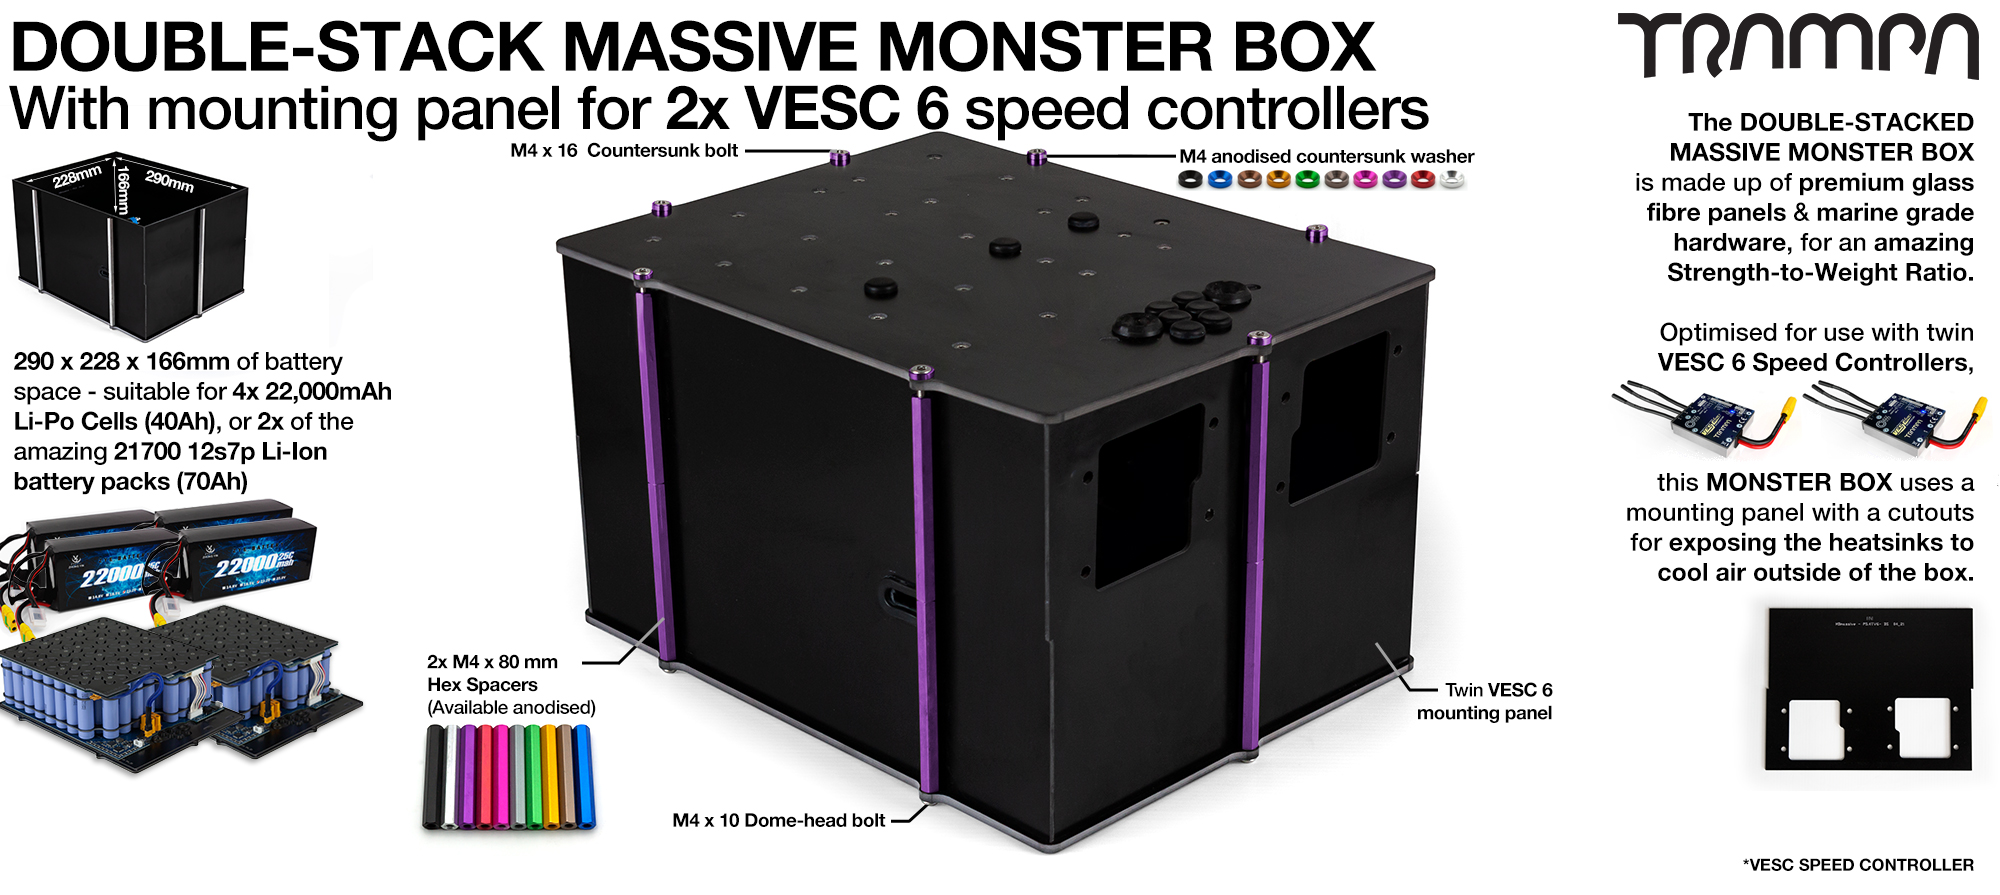 2WD DOUBLE STACK MASSIVE MONSTER Box with 2x VESC 6 Mounting Panel